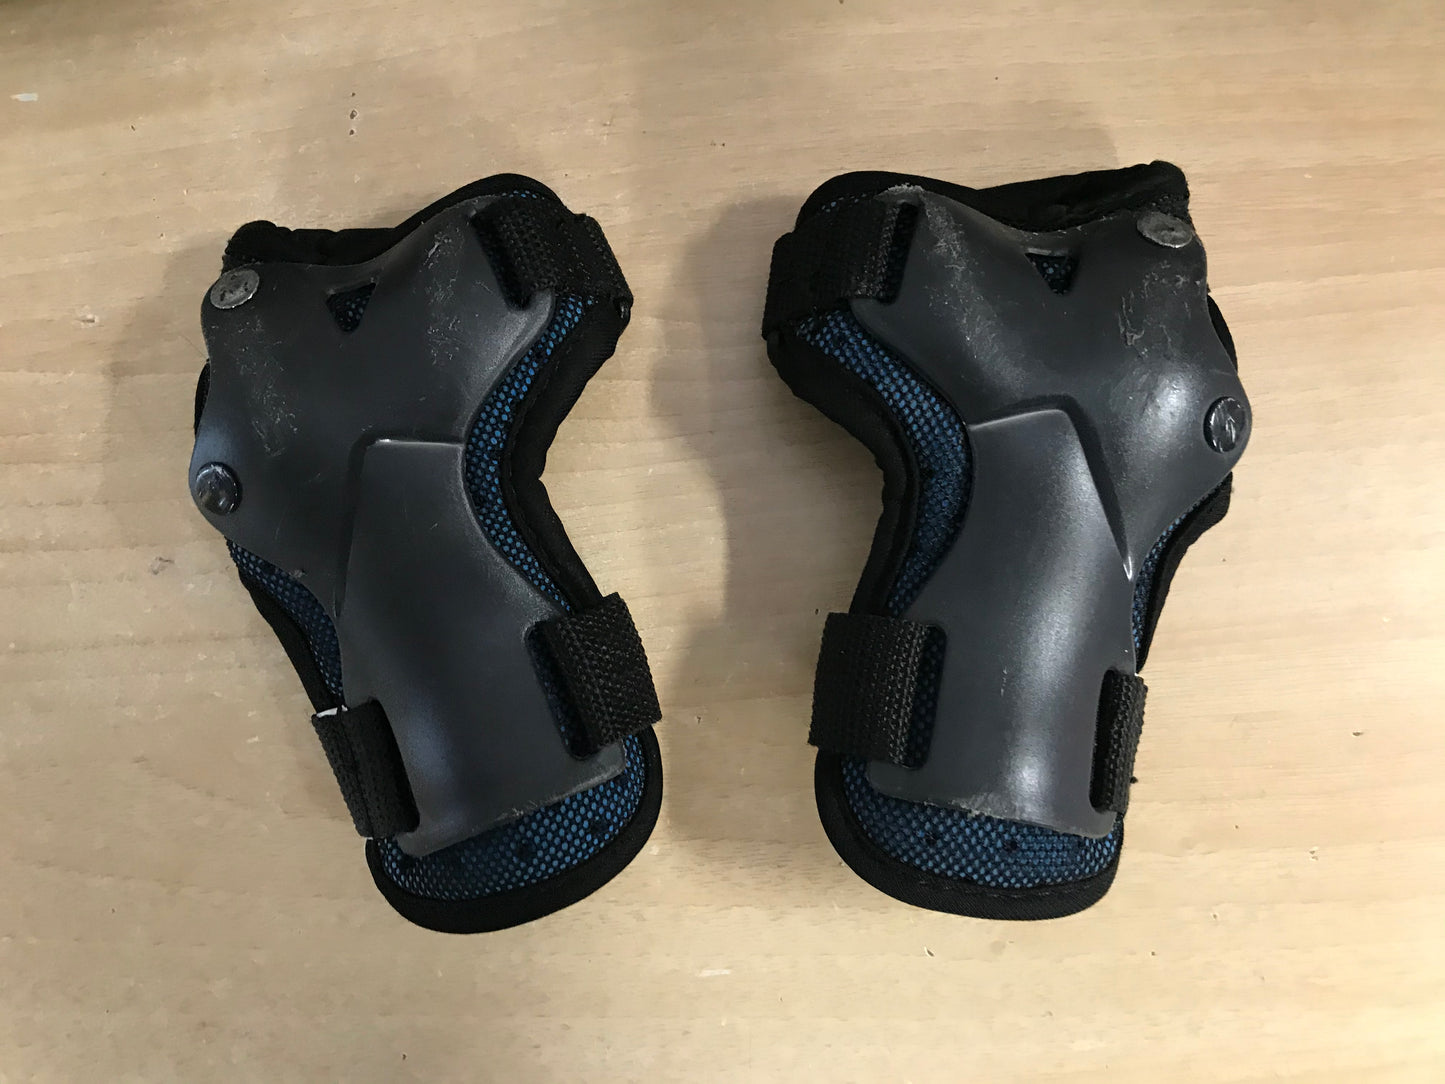 Inline Roller Skates Protective Pads Child Size 3-7 B Square Ventelation System From Europe Excellent Quality Minor Wear